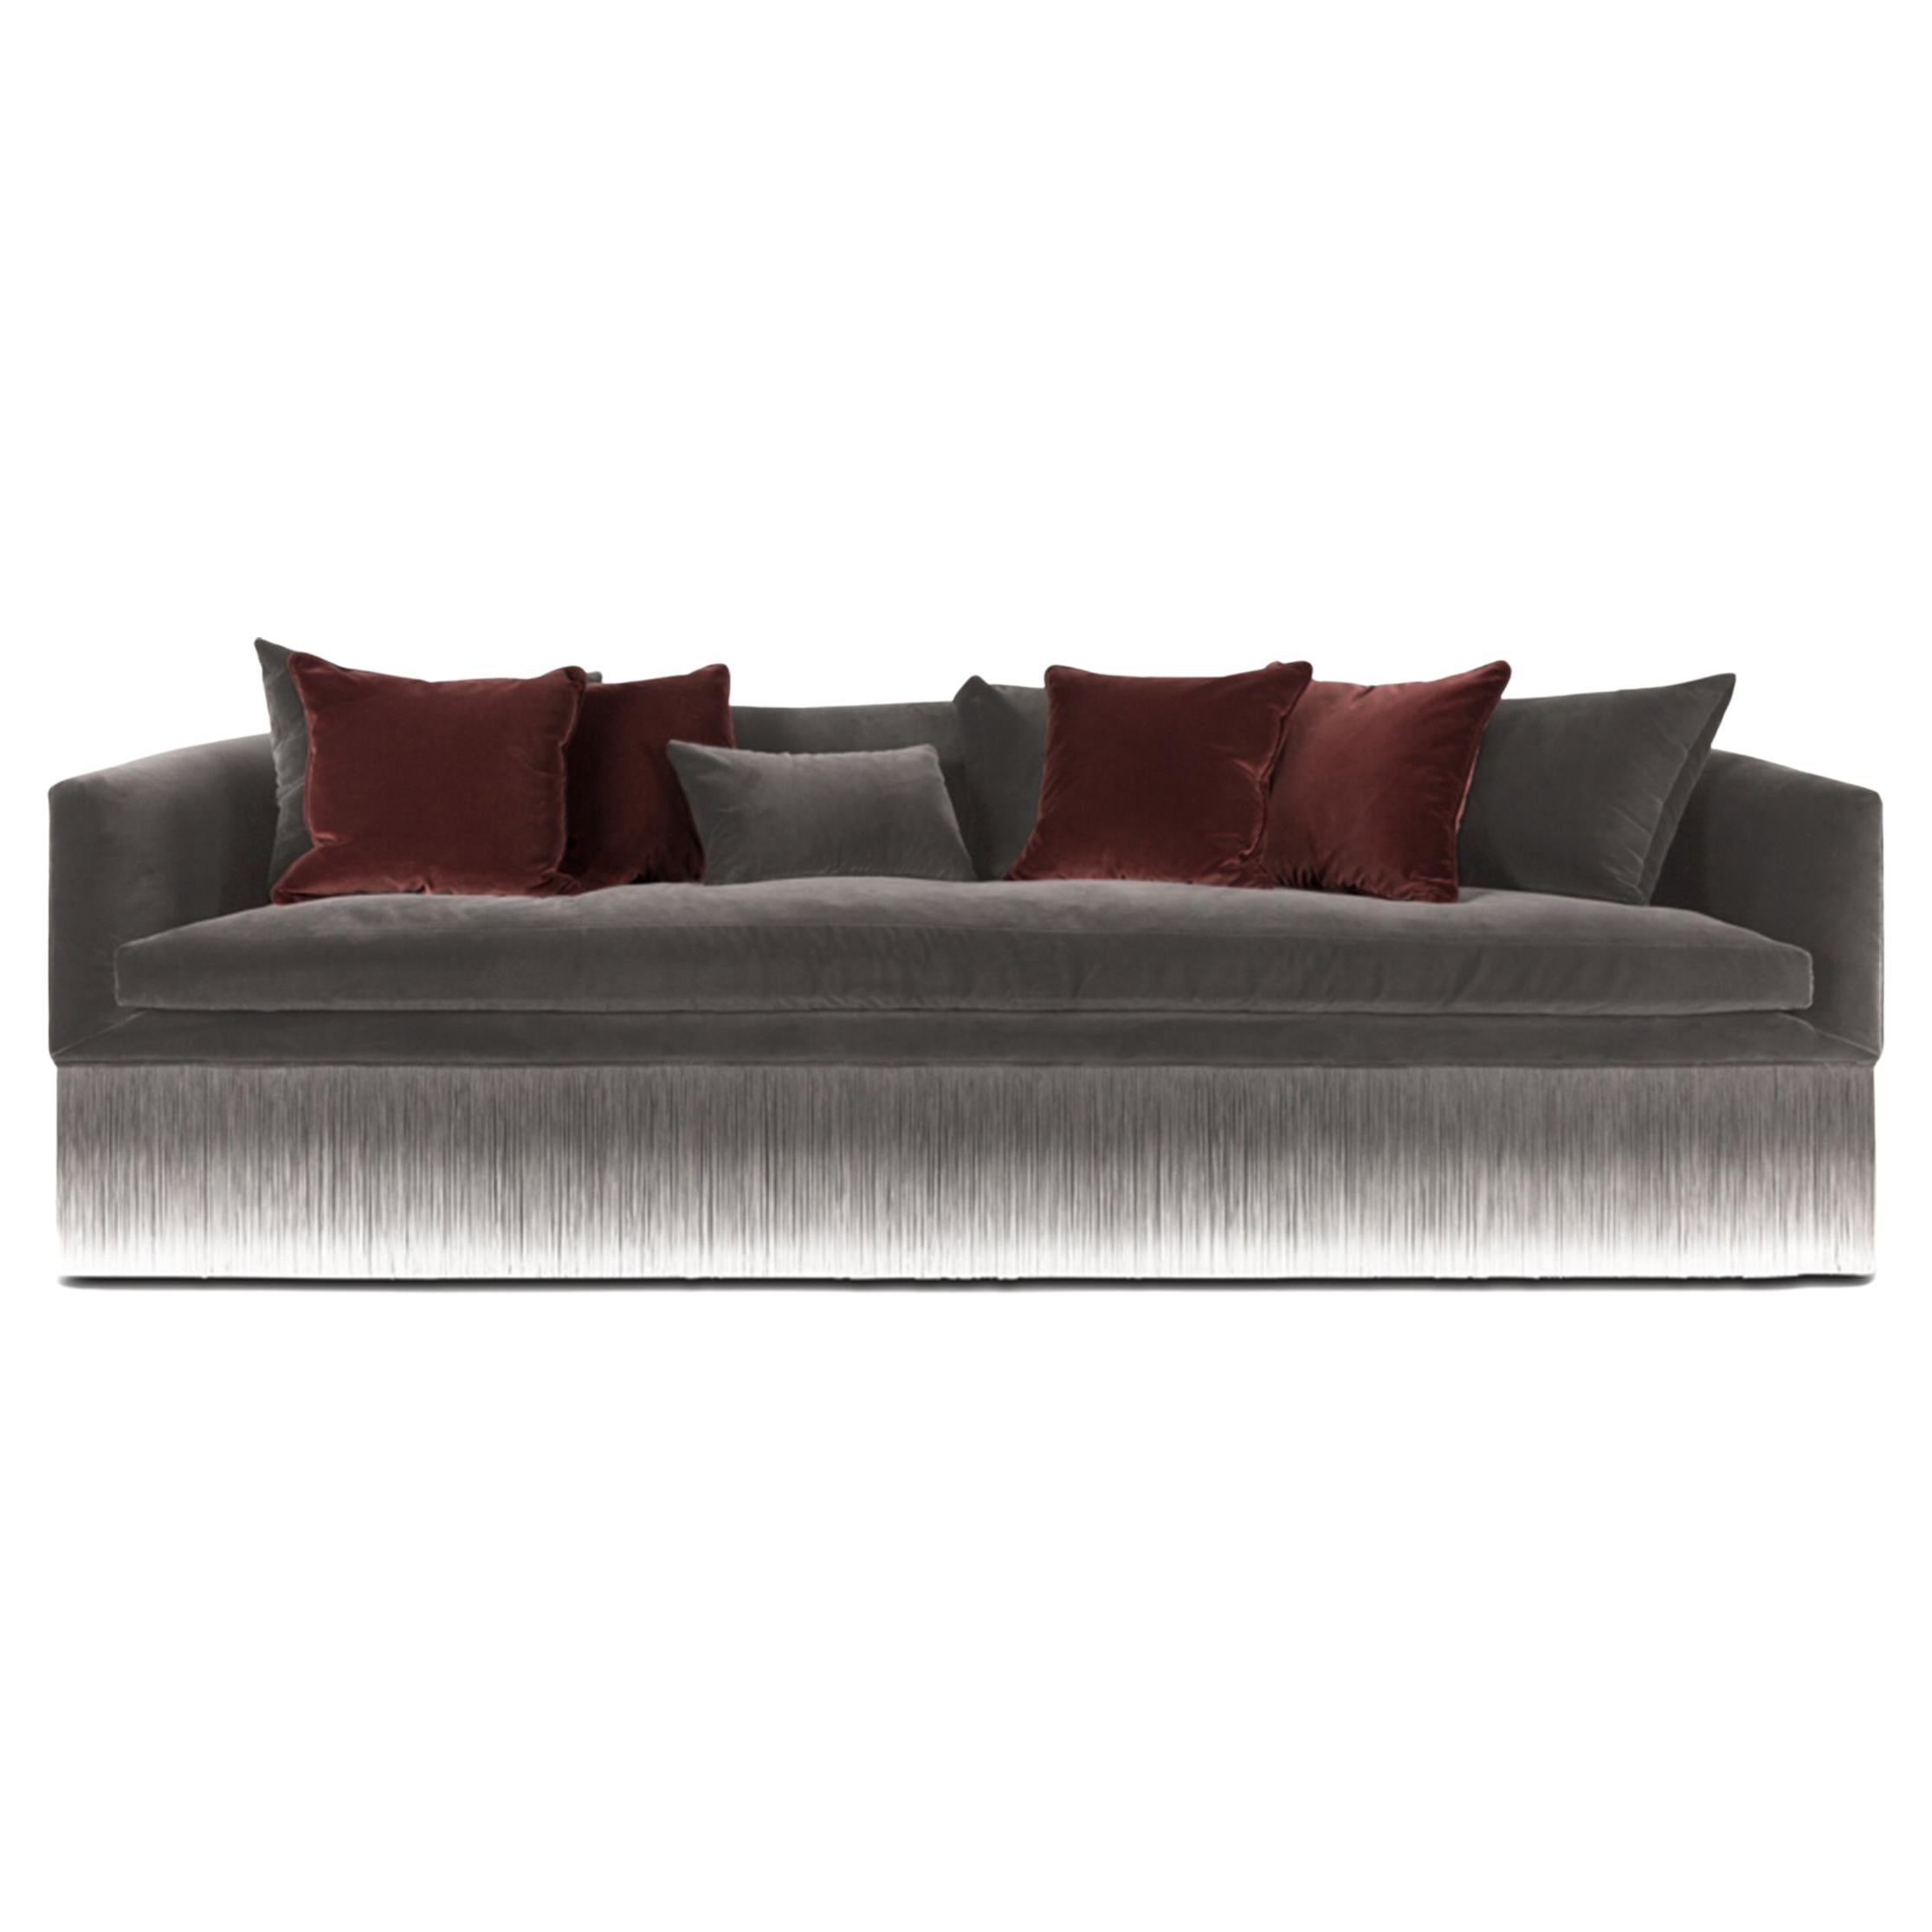 Moooi Amami Sofa with Fringes in Light Grey Upholstery by Lorenza Bozzoli